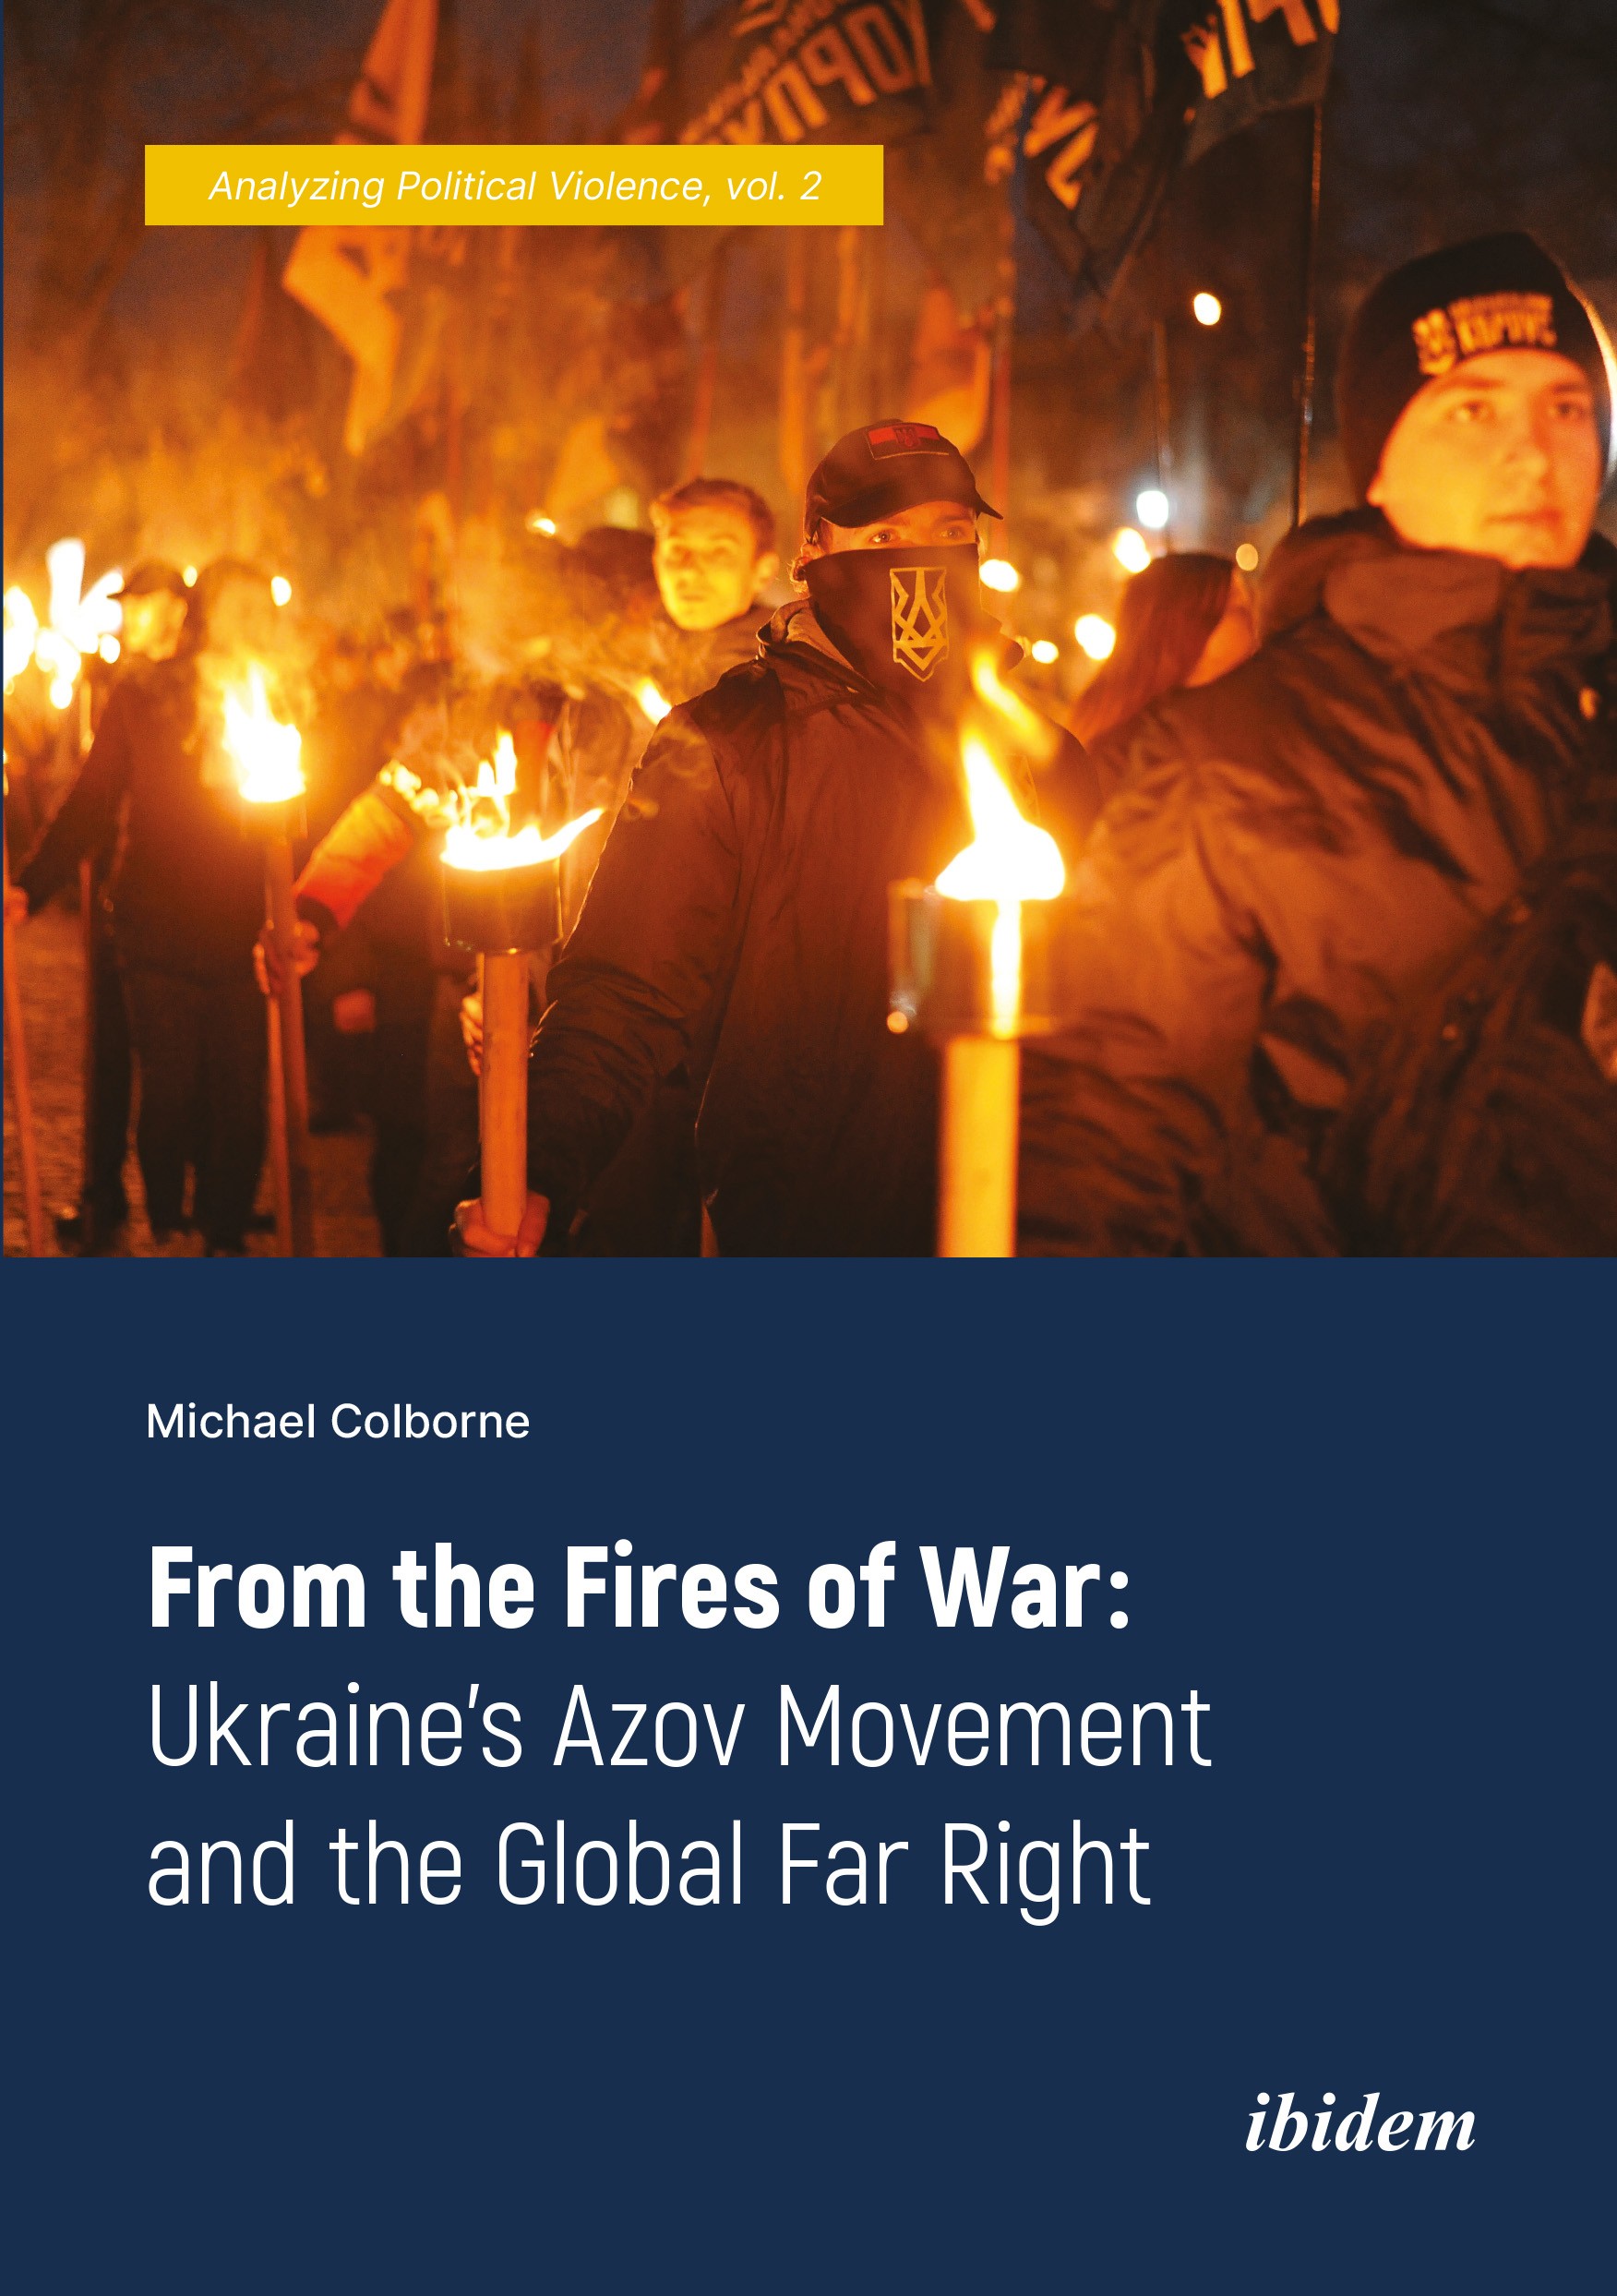 From the Fires of War: Ukraine’s Azov Movement and the Global Far Right